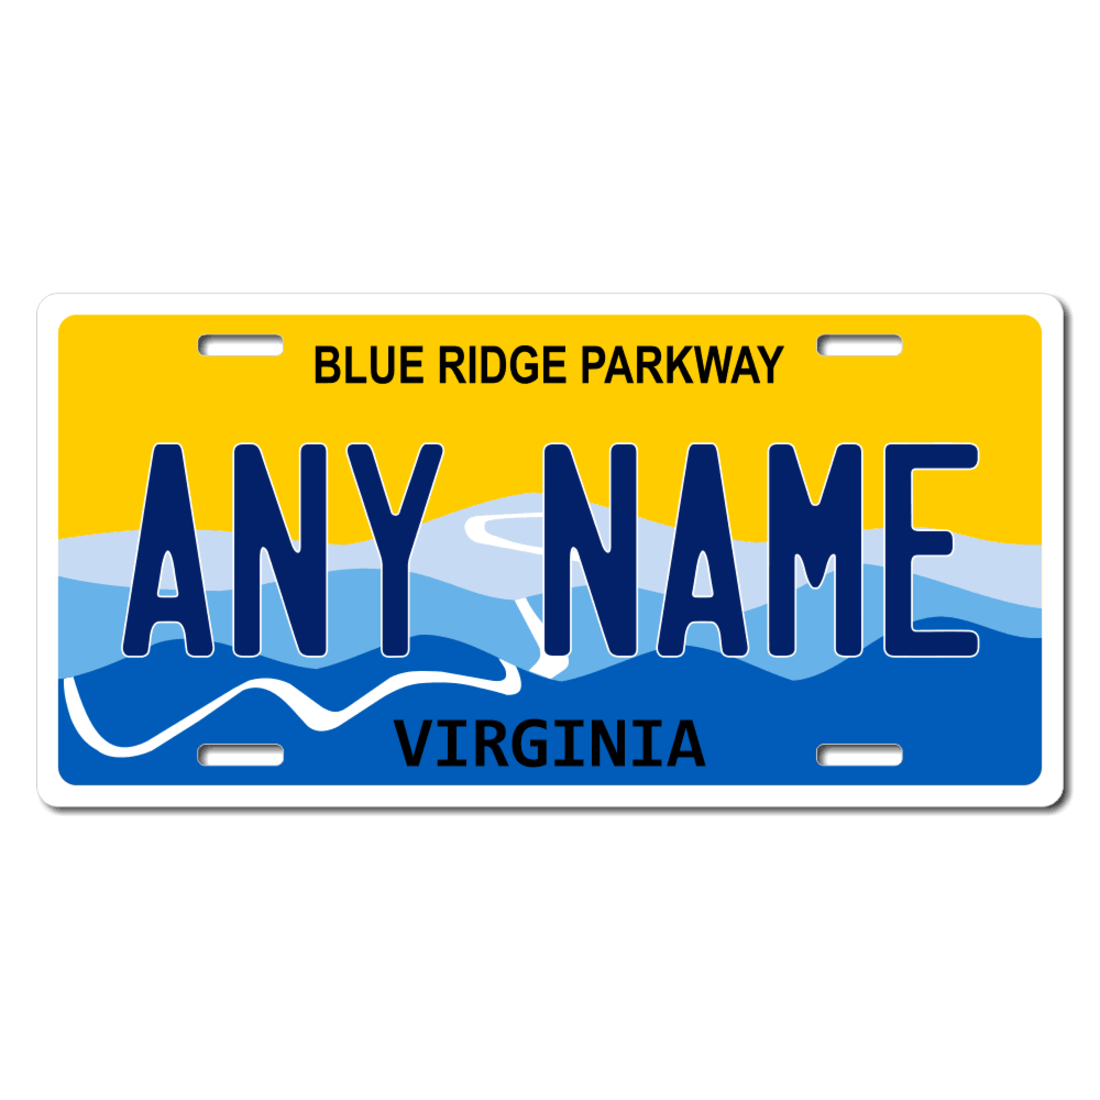 Personalized Virginia License Plate for Bicycles Kid's Bikes & Cars Ver 1